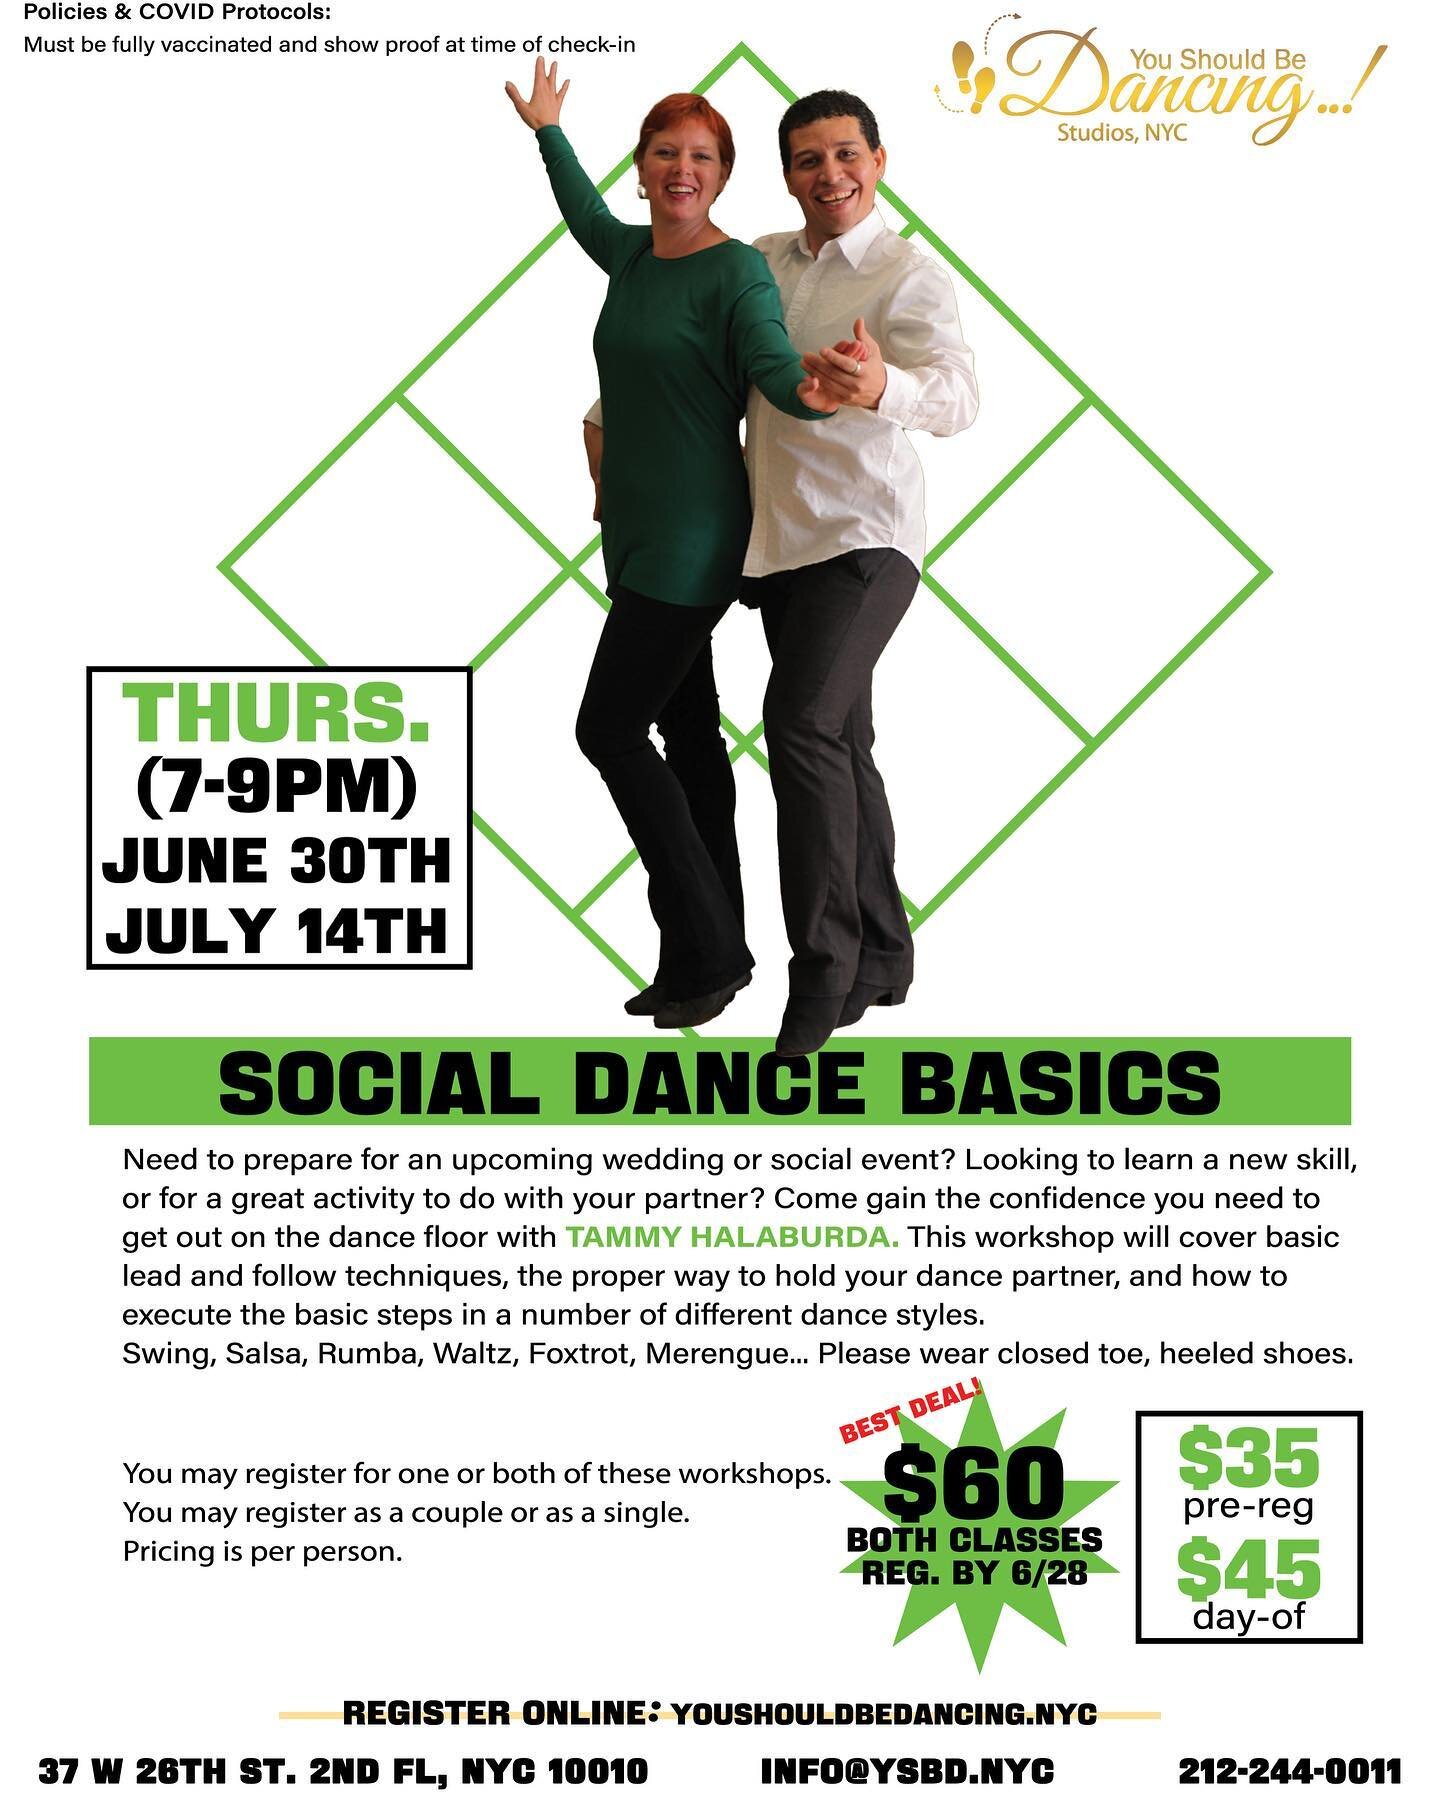 Need to prepare for an upcoming wedding or social event? Looking to learn a new skill or for a great activity to do with a partner? Check out this workshop with Tammy Halaburda this Thursday night at YSBD! 
You will learn the basic steps in a number 